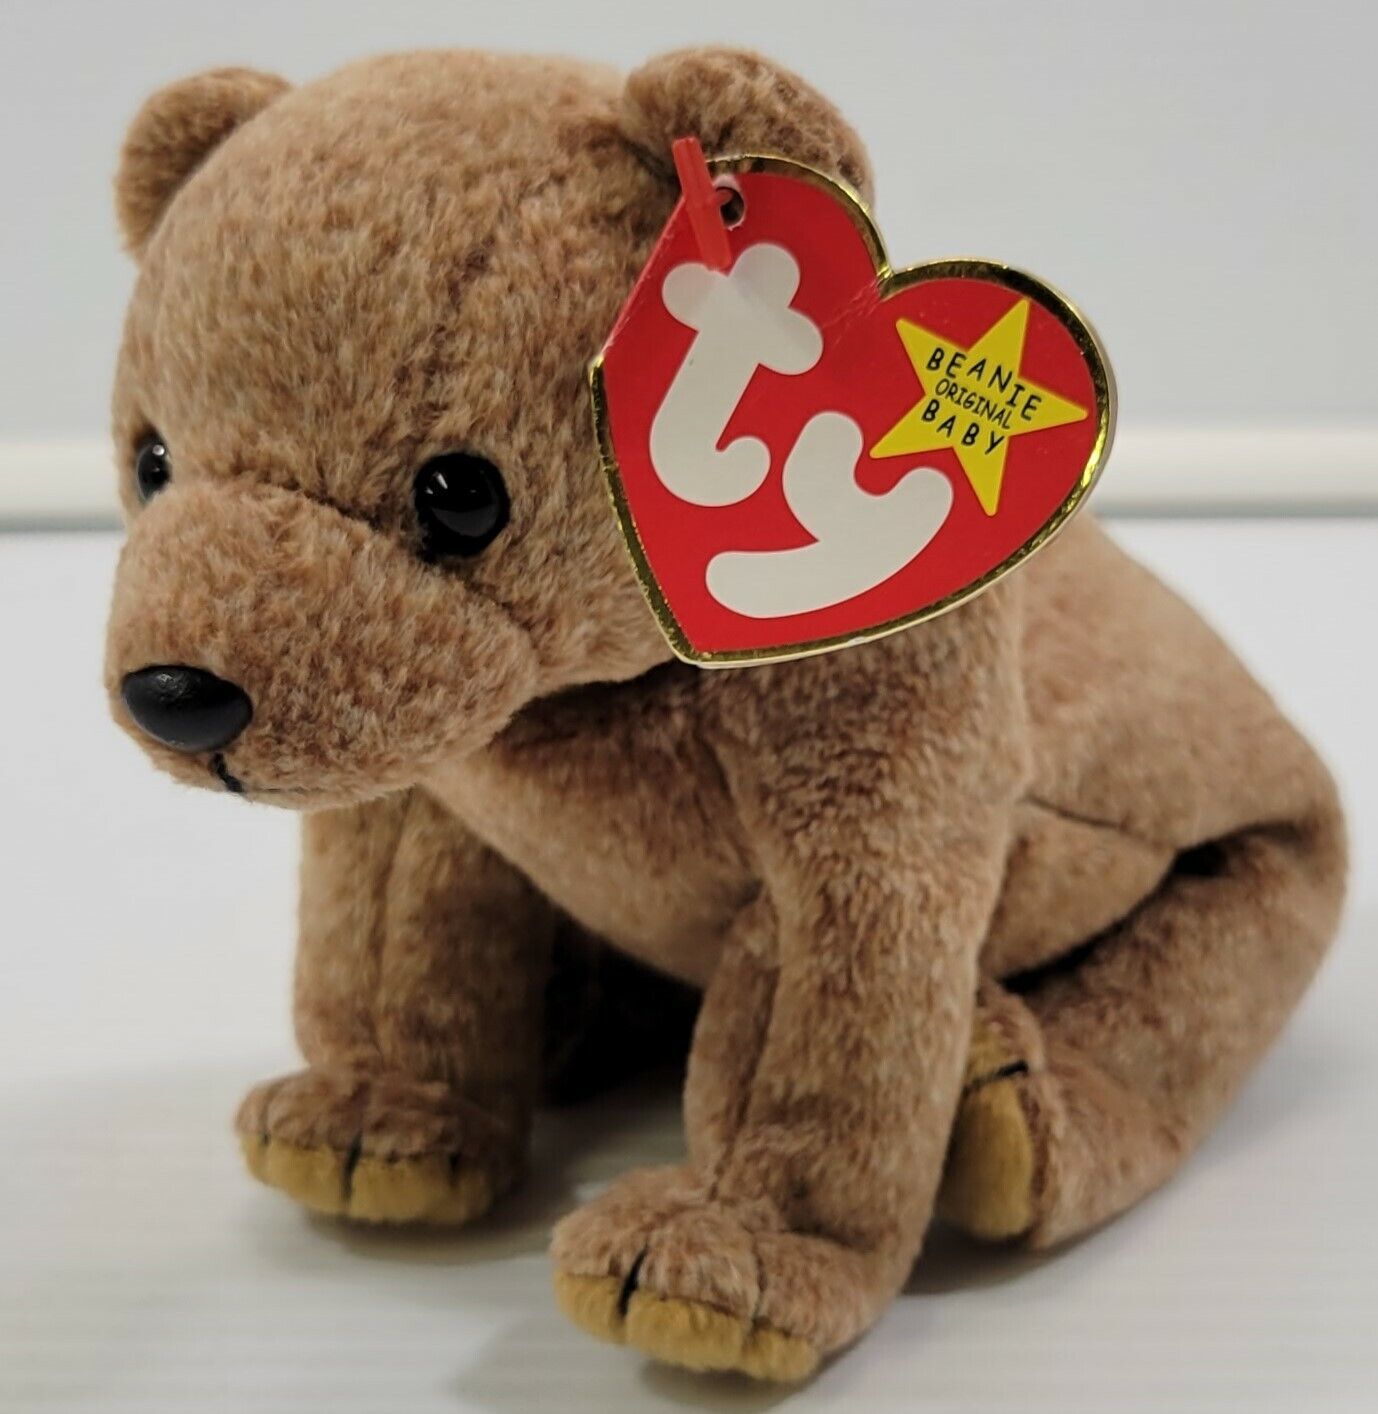 Primary image for MM) TY Beanie Babies Pecan Stuffed Bear April 15, 1999